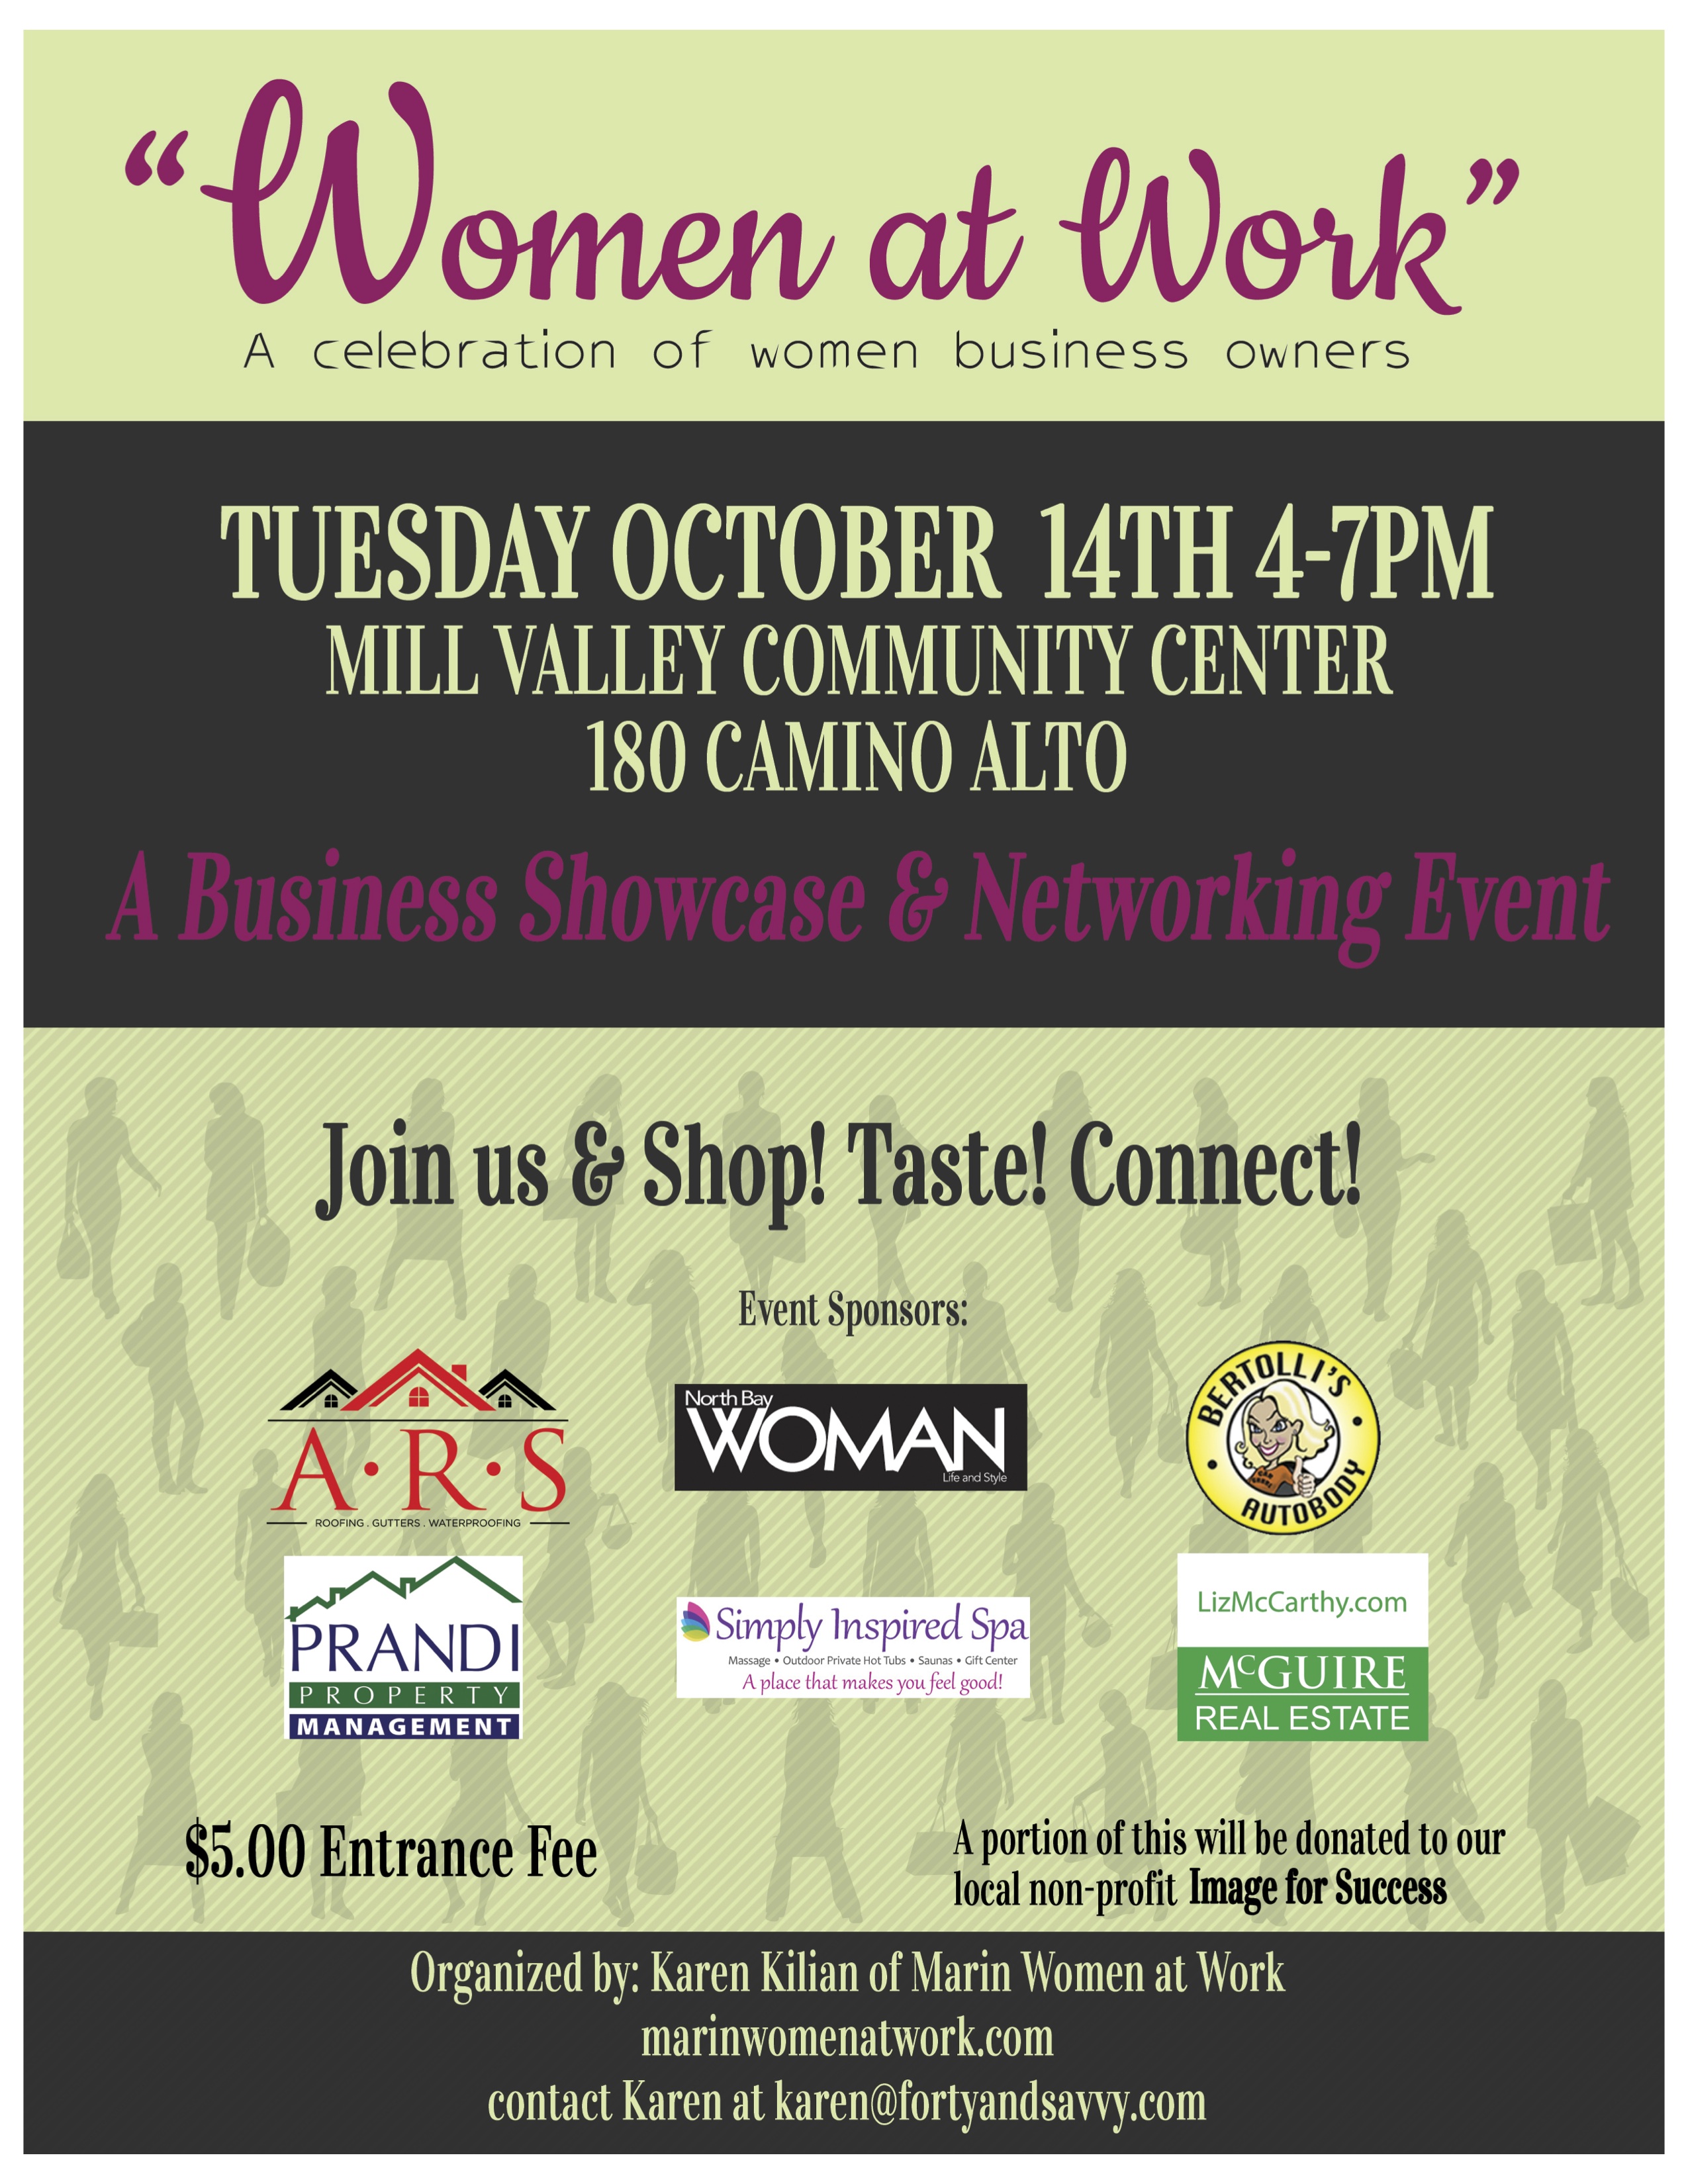 Living Well Assisted Living At Home will participate in the “Women at Work Business Showcase”